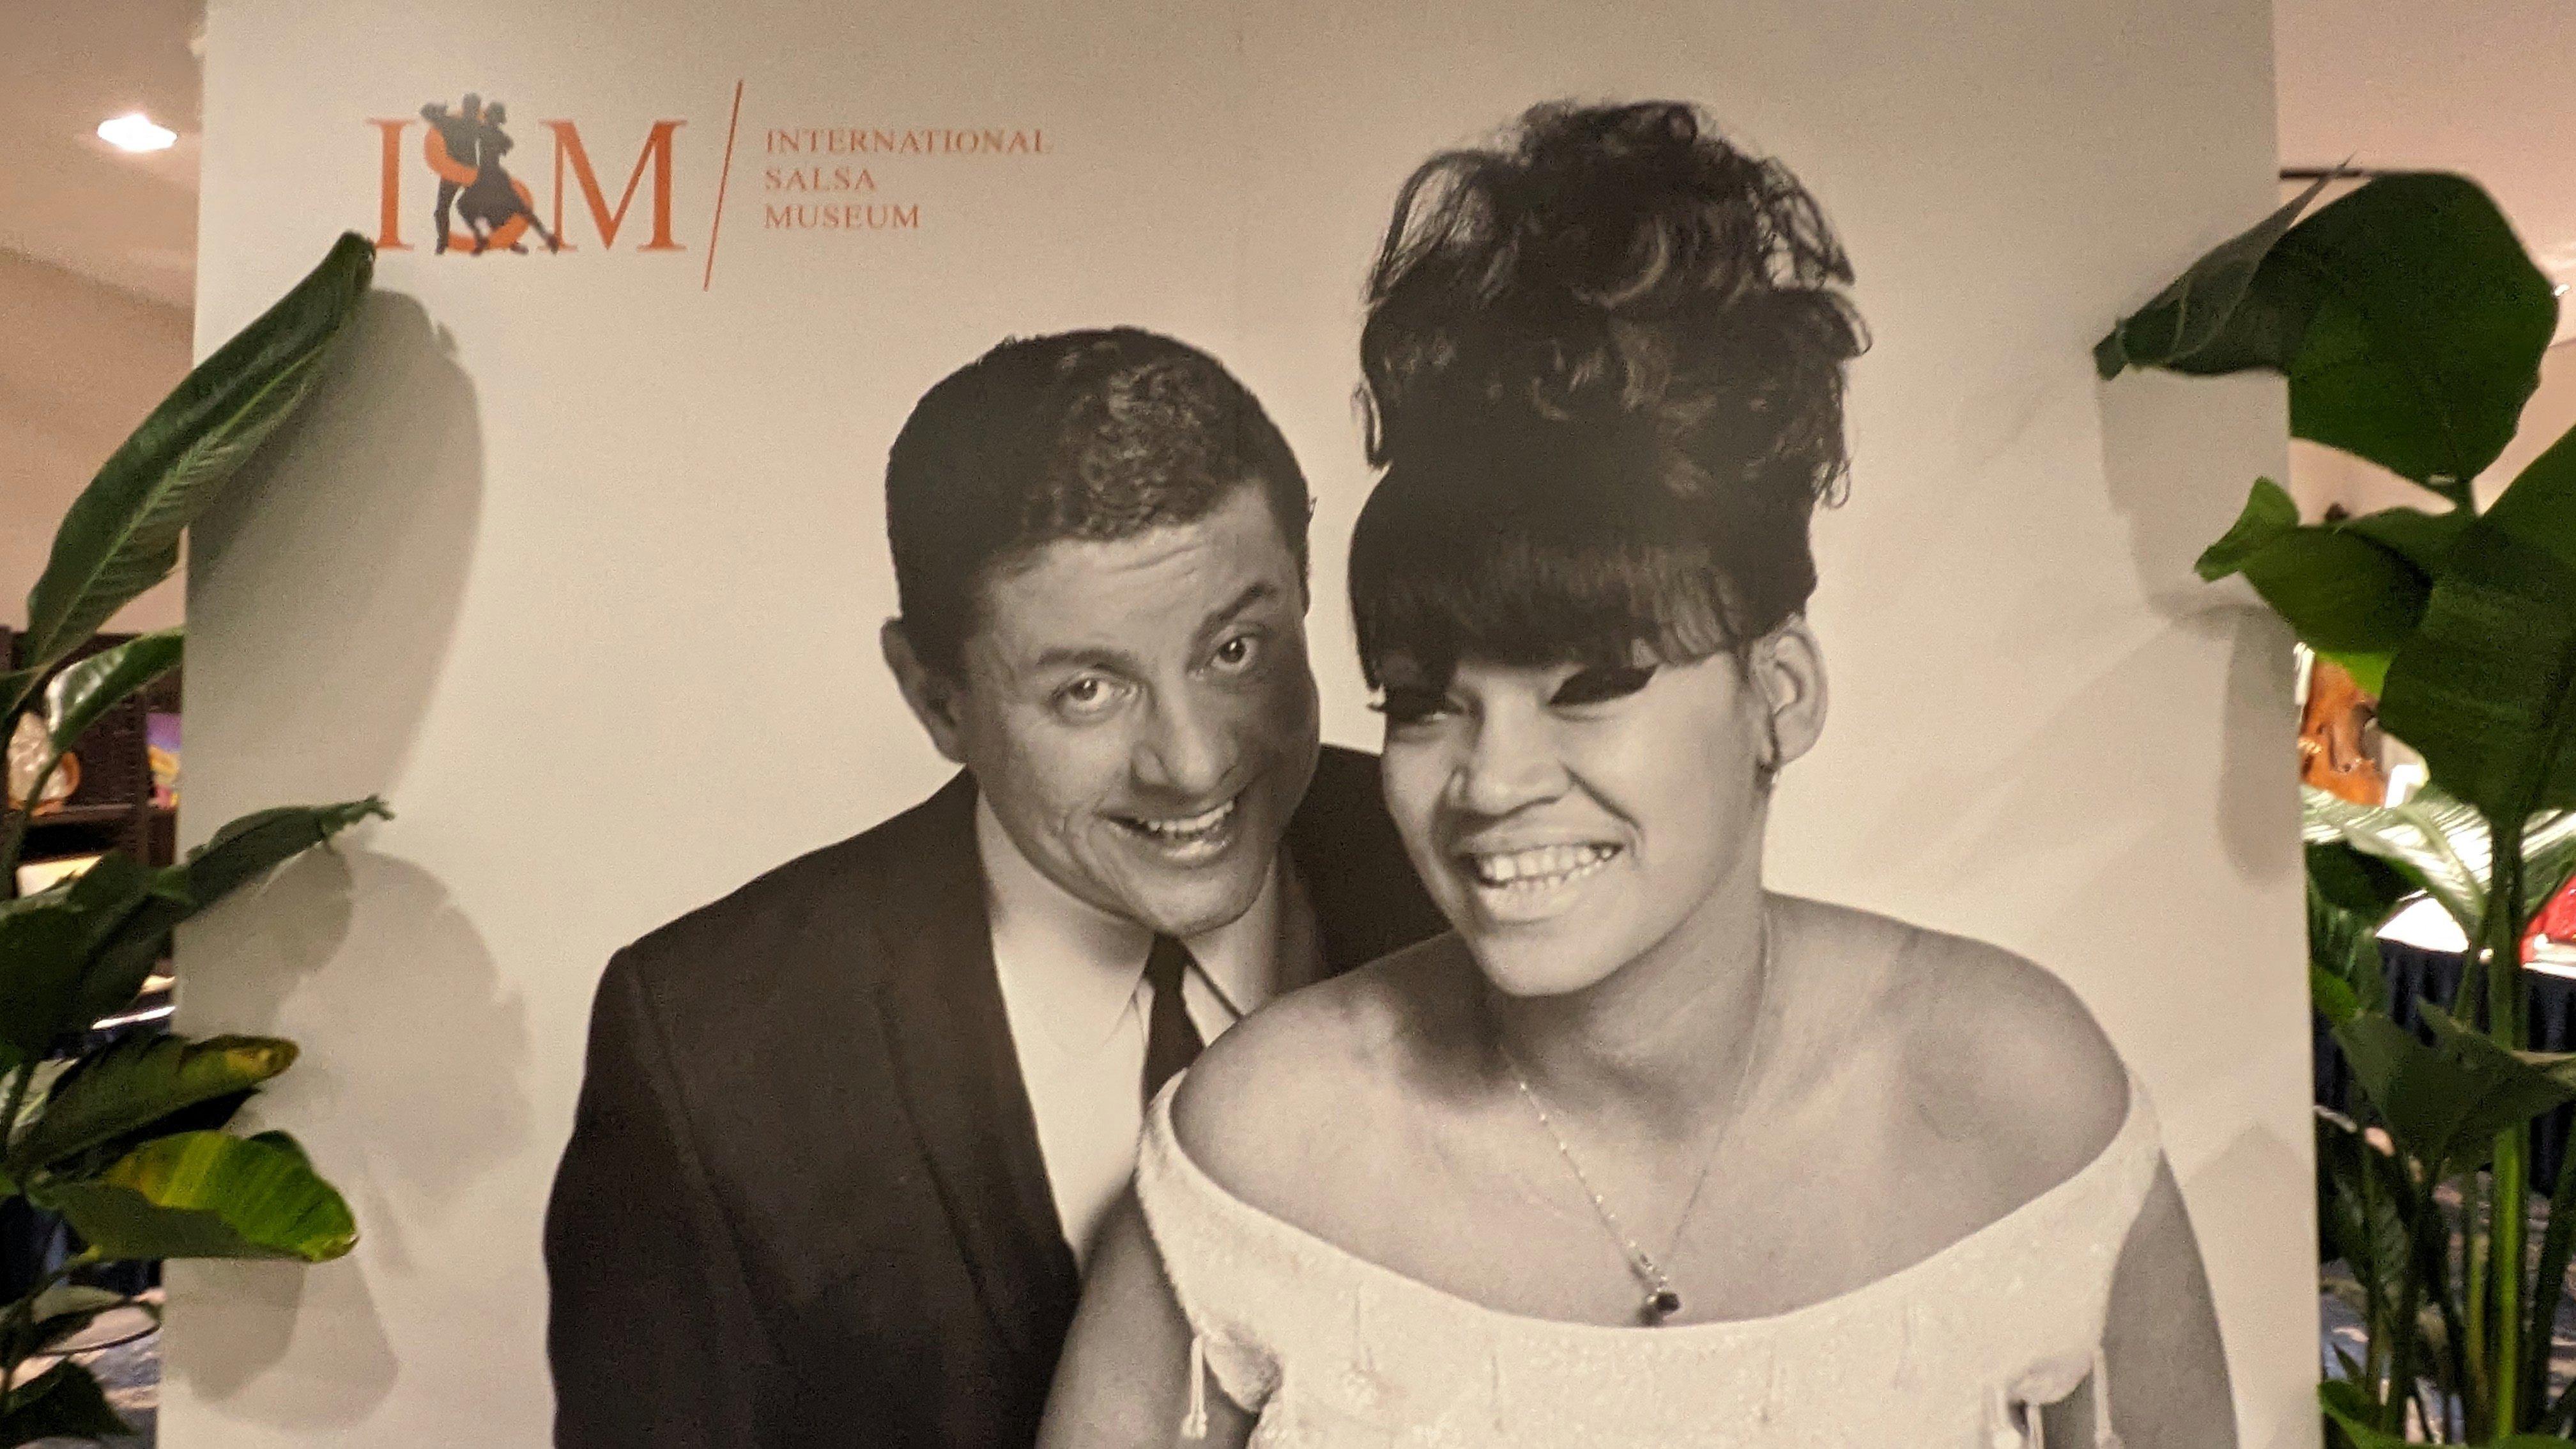 8 Things We Learned At The International Salsa Museum's Tito Puente & La Lupe Exhibit